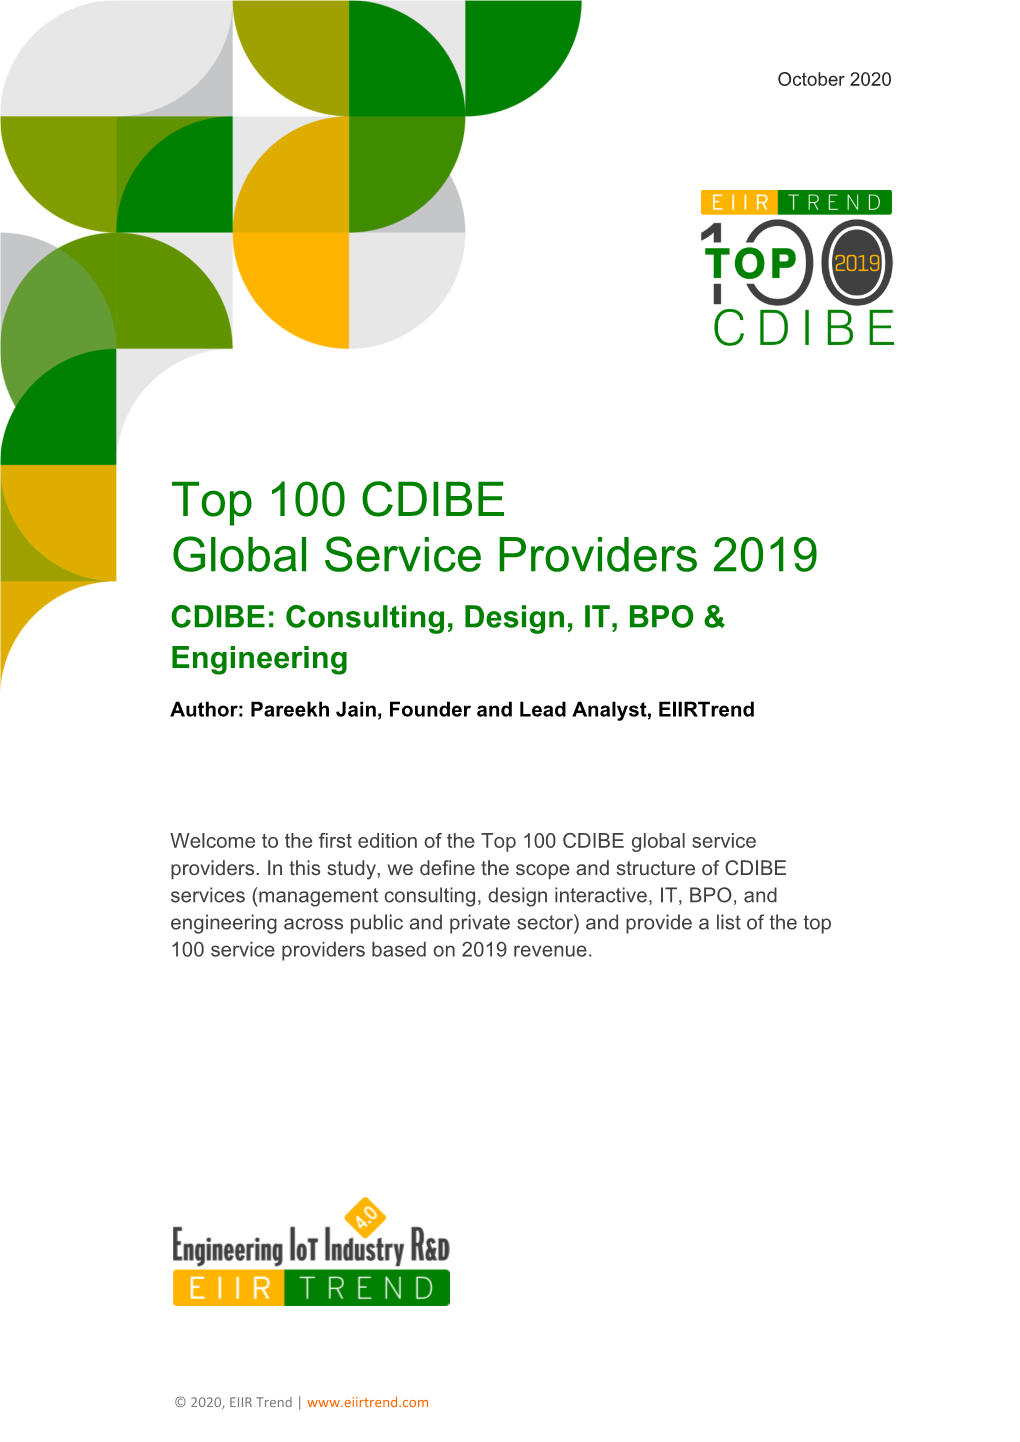 Top 100 CDIBE Global Service Providers 2019 CDIBE: Consulting, Design, IT, BPO & Engineering